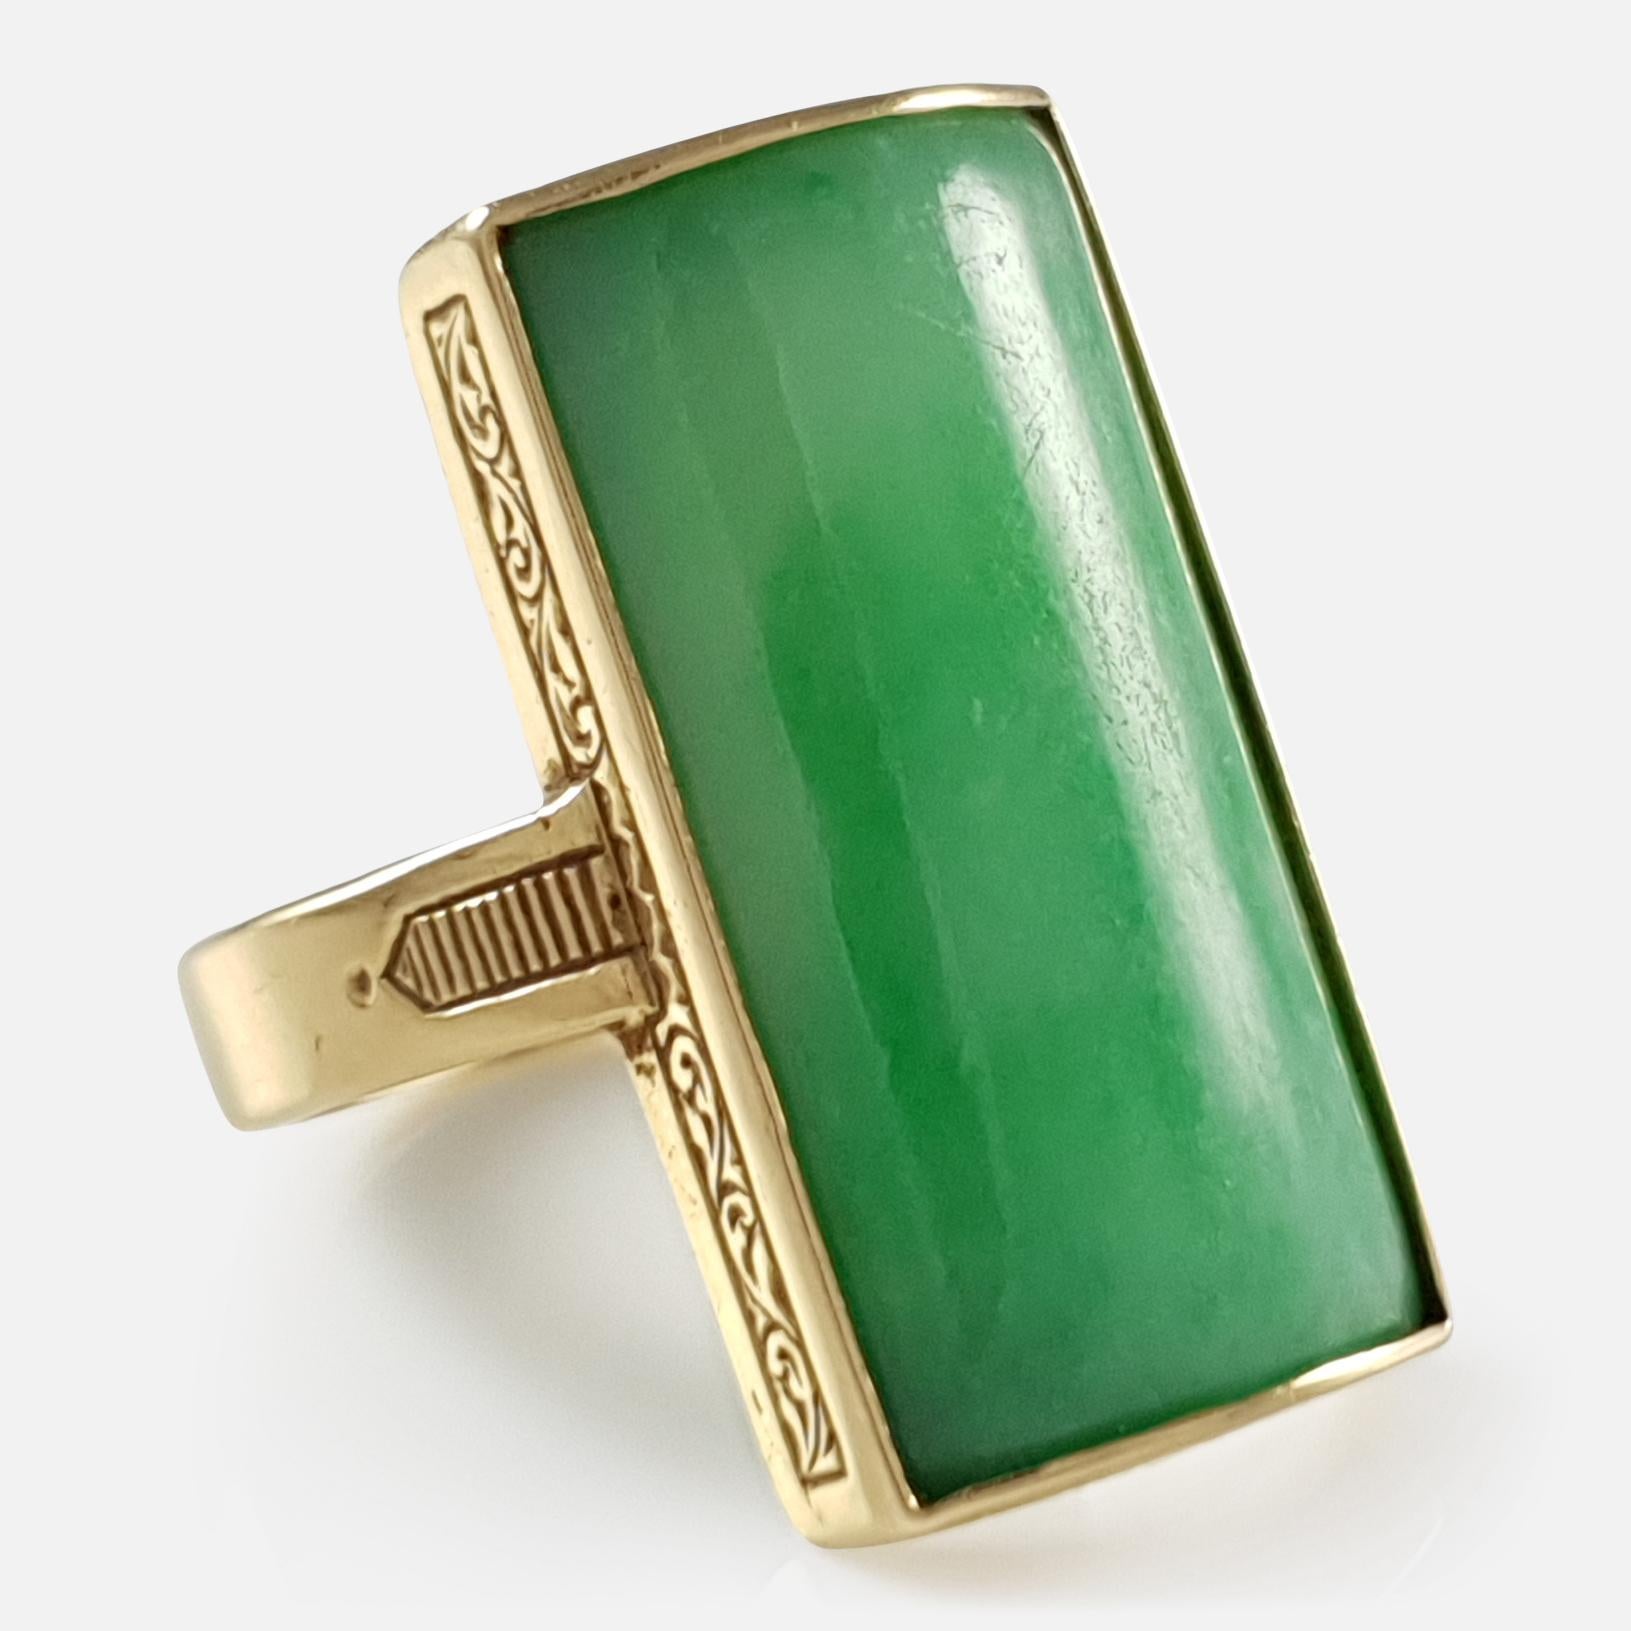 Description: - This is a fine 18 karat yellow gold apple green jade ring - by Bernard Instone 1958. The ring is set with a rectangular curved jade plaque, rub set to a collet with hand engraved scroll and leaf bands, and a flat section shank with